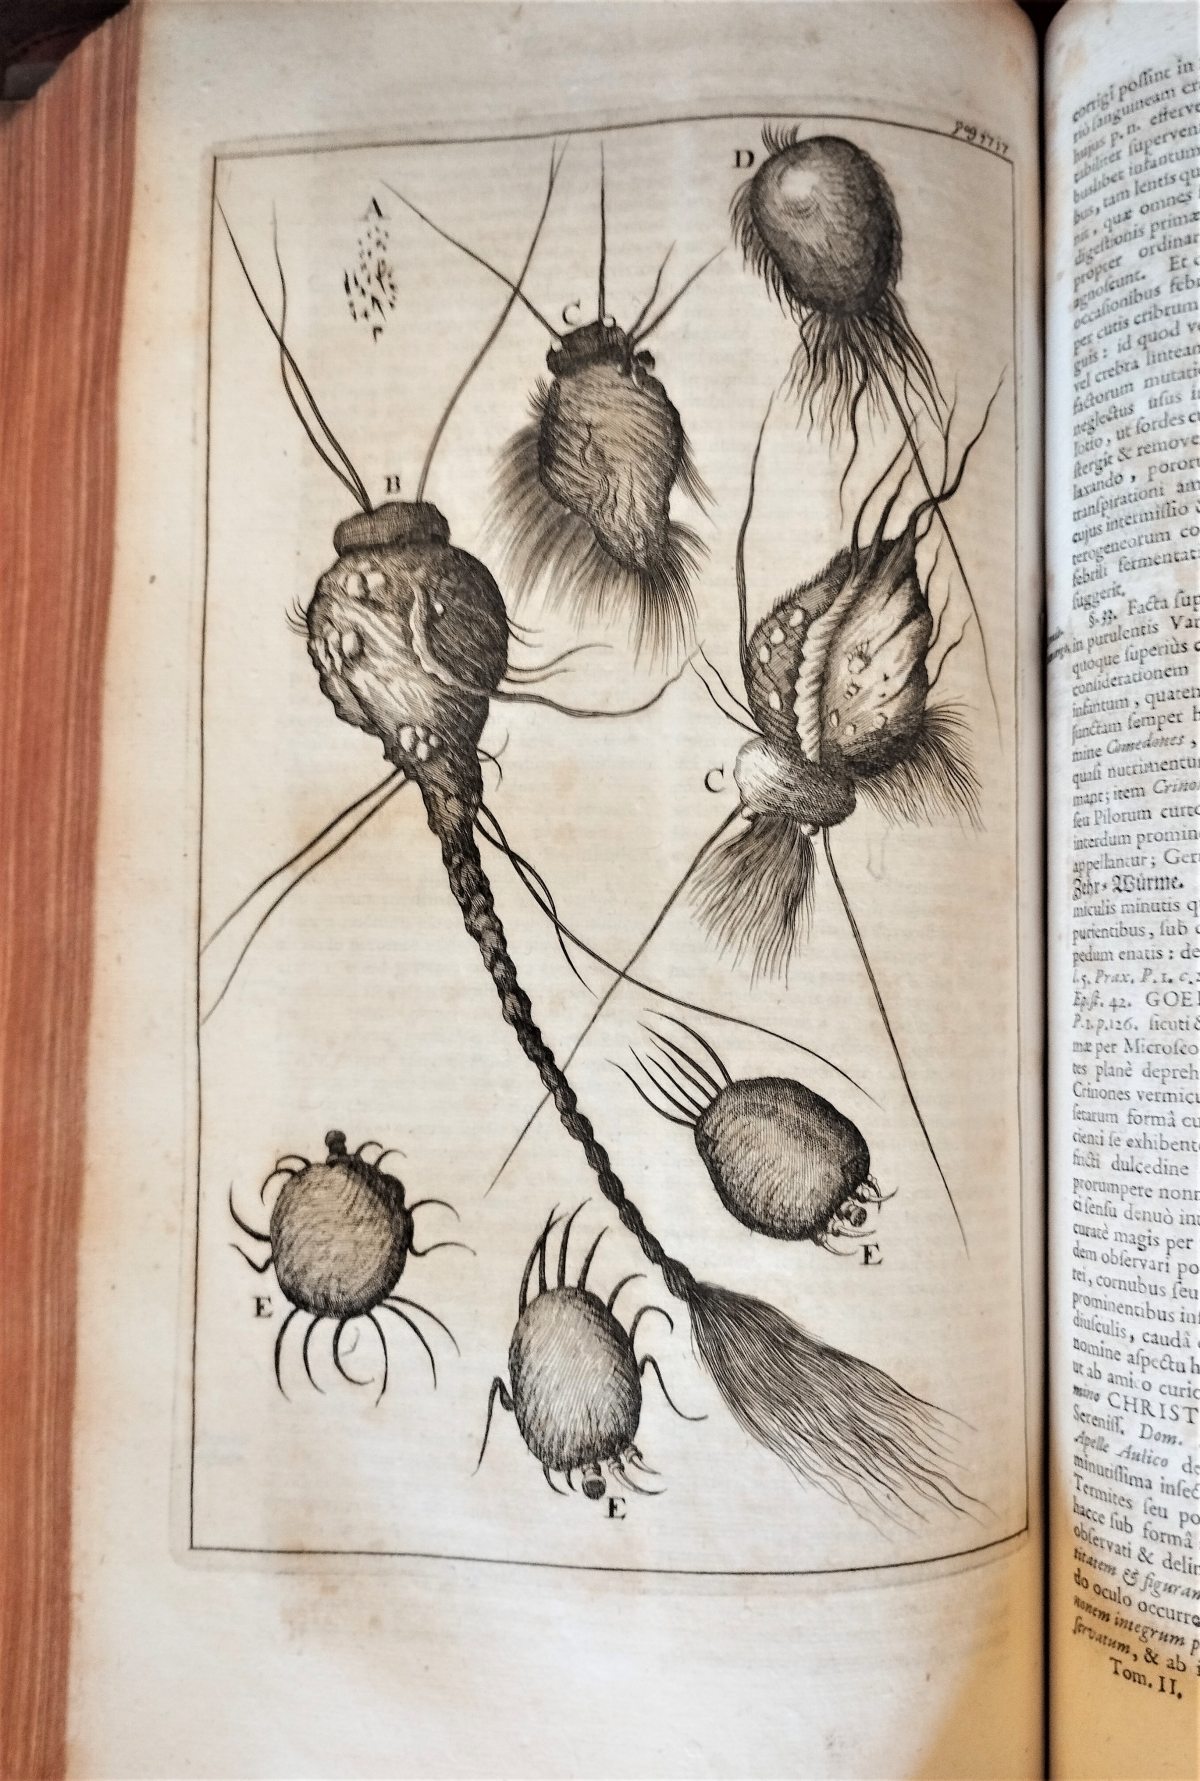 An engraved illustration of different specimens of both a hairy parasitic worm and a round mite.